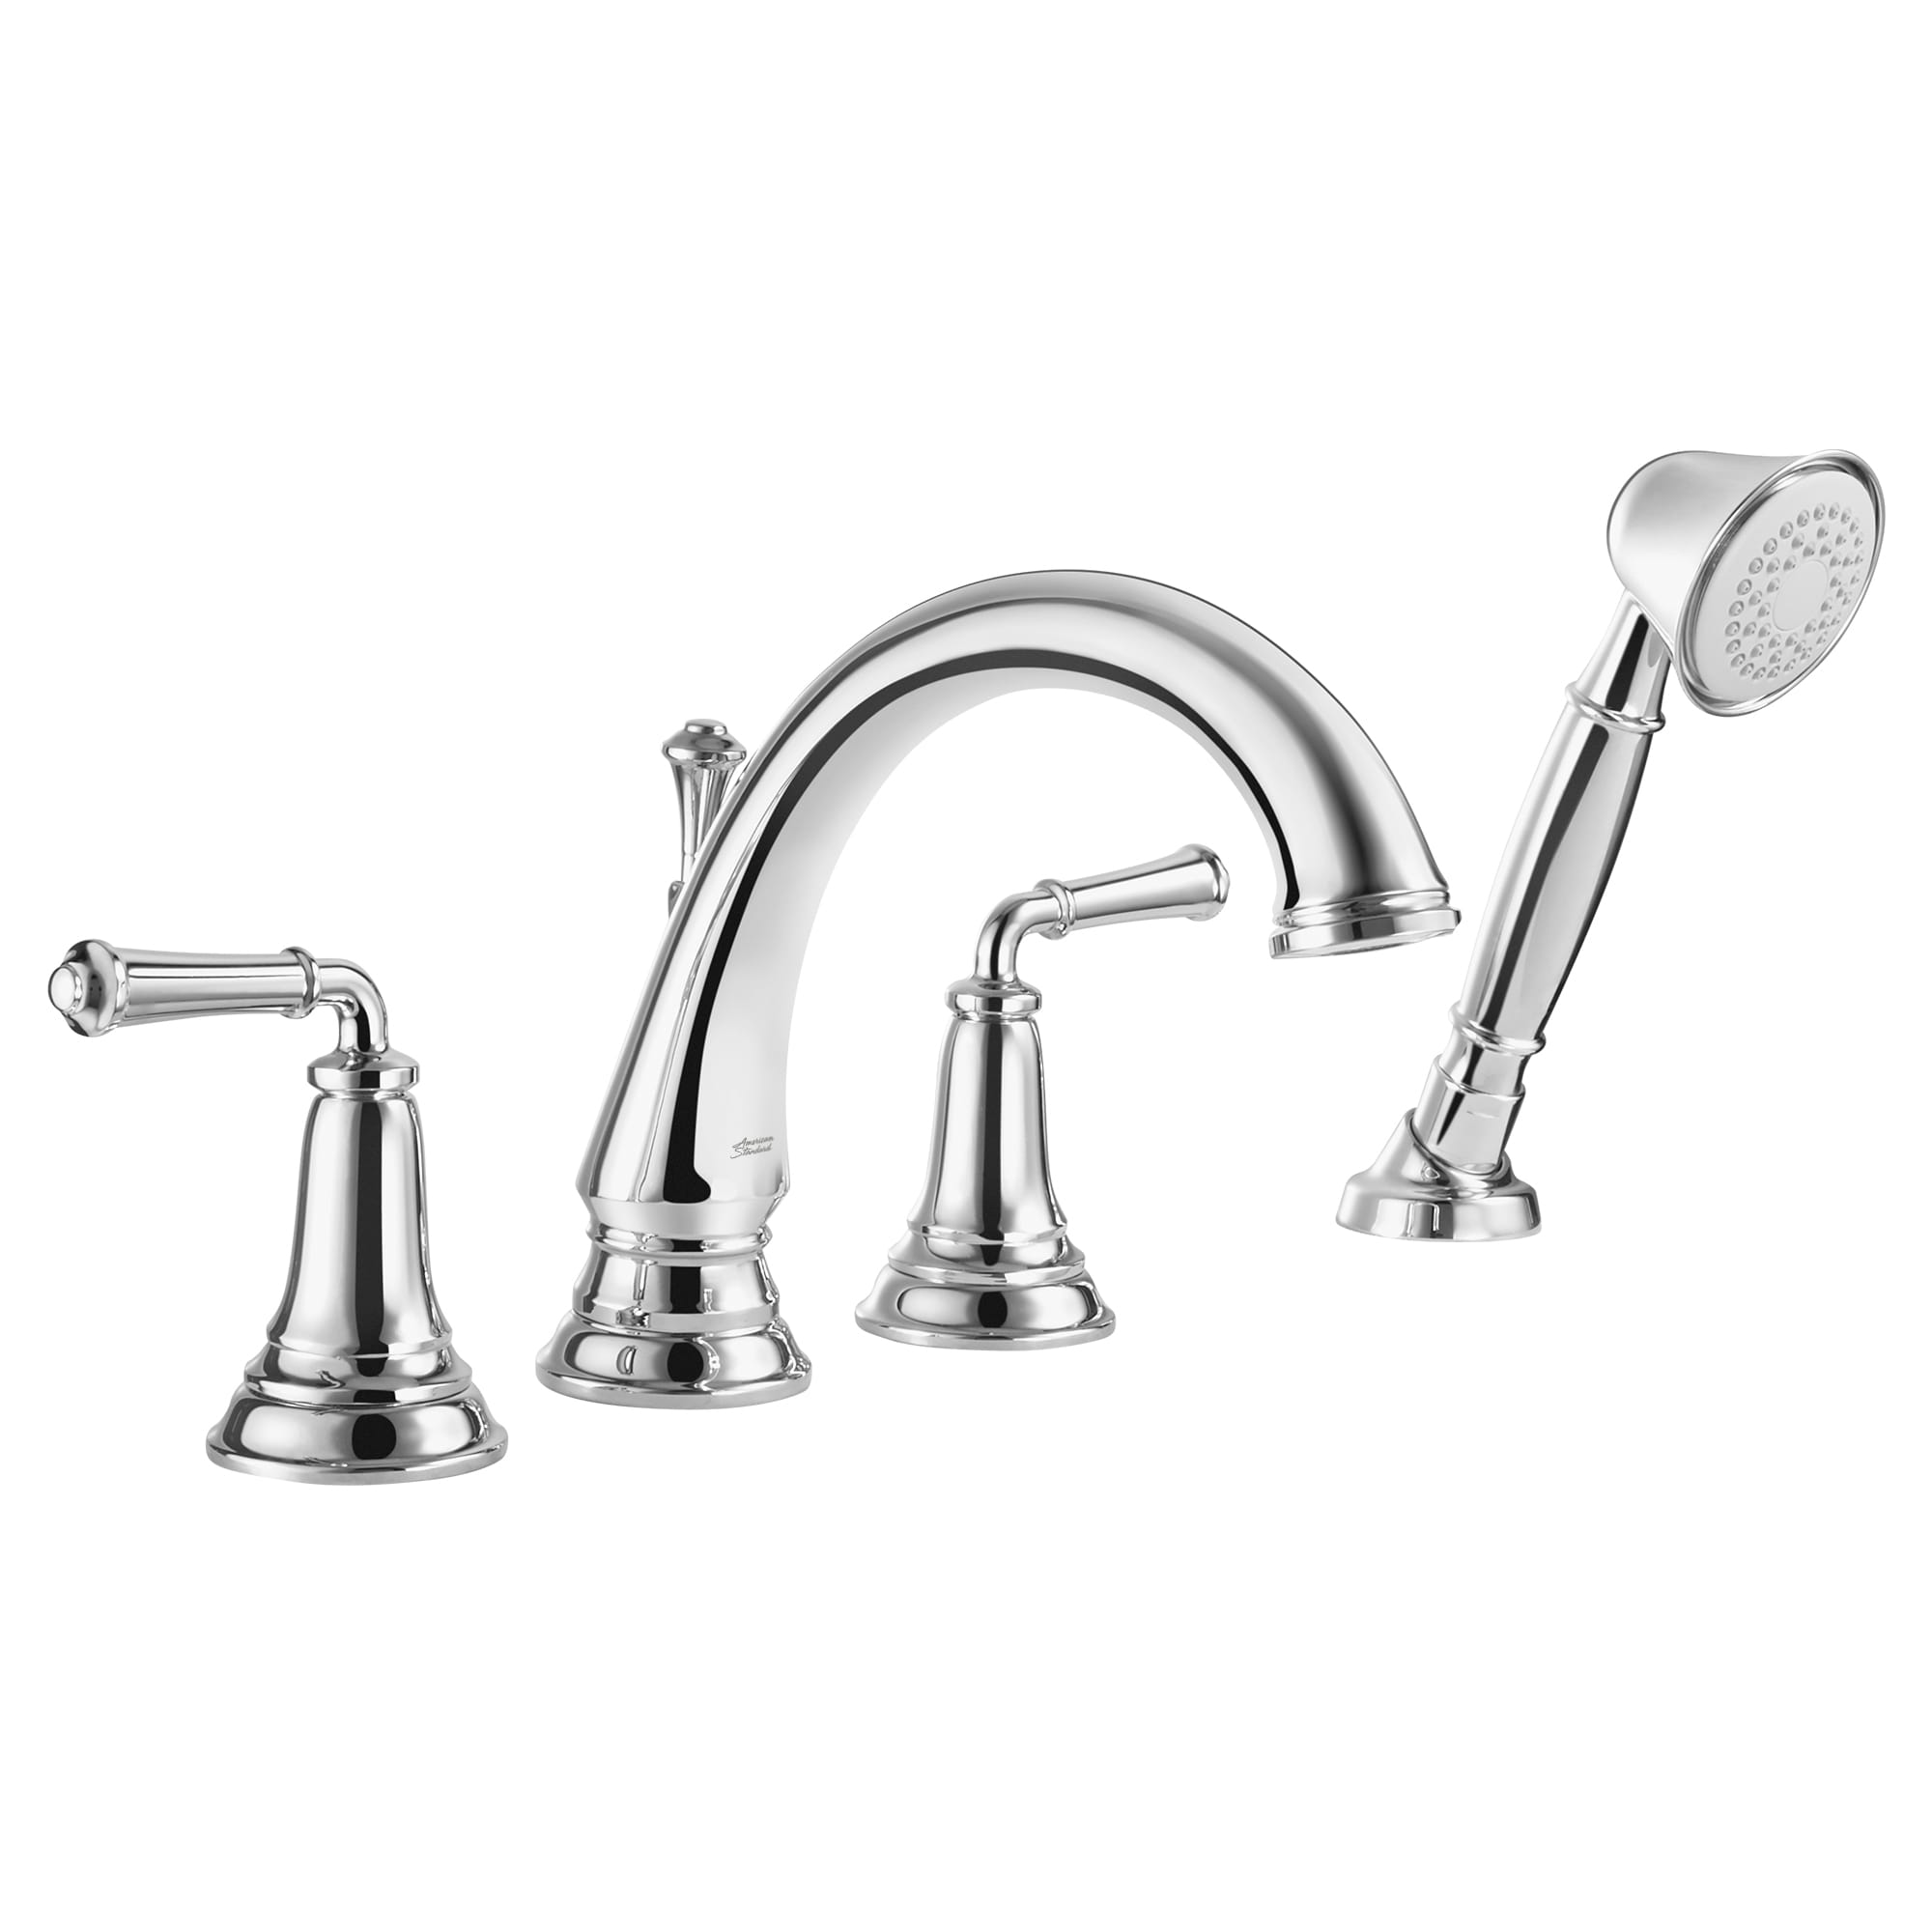 Delancey Bathtub Faucet With  Lever Handles and Personal Shower for Flash Rough In Valve CHROME